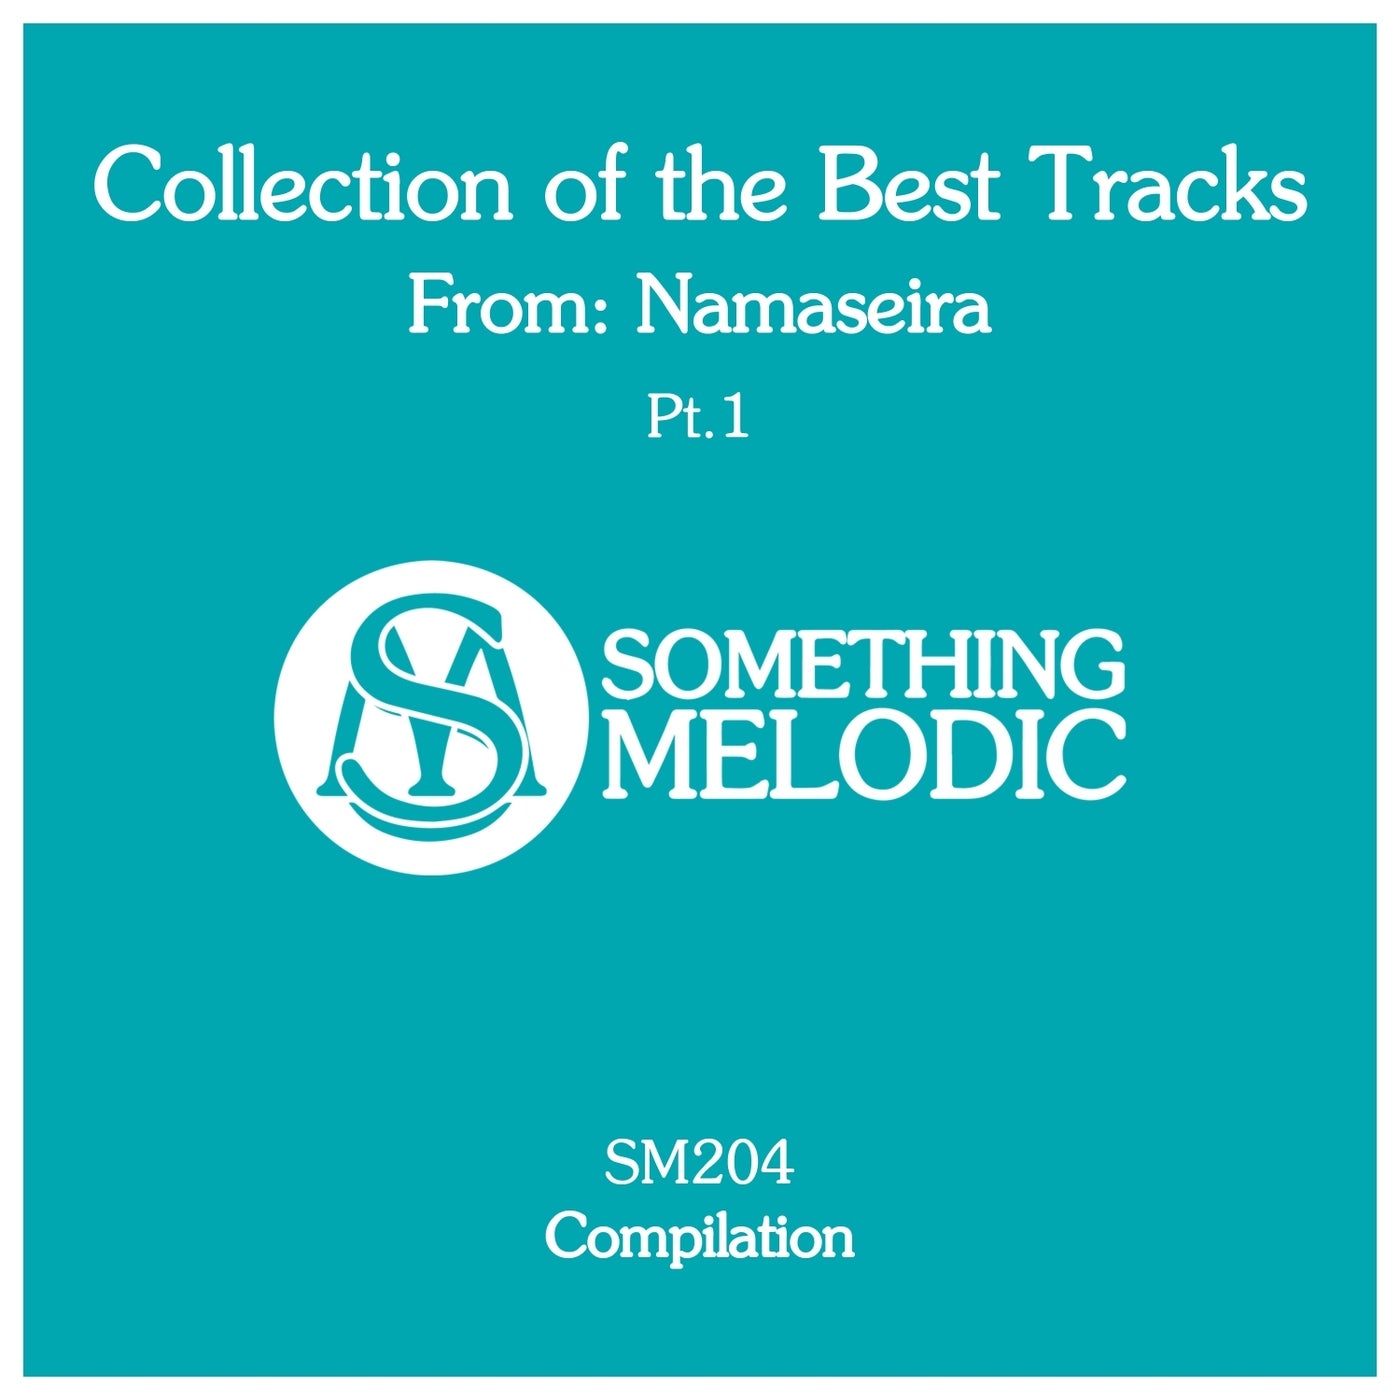 Collection of the Best Tracks From: Namaseira, Pt. 1